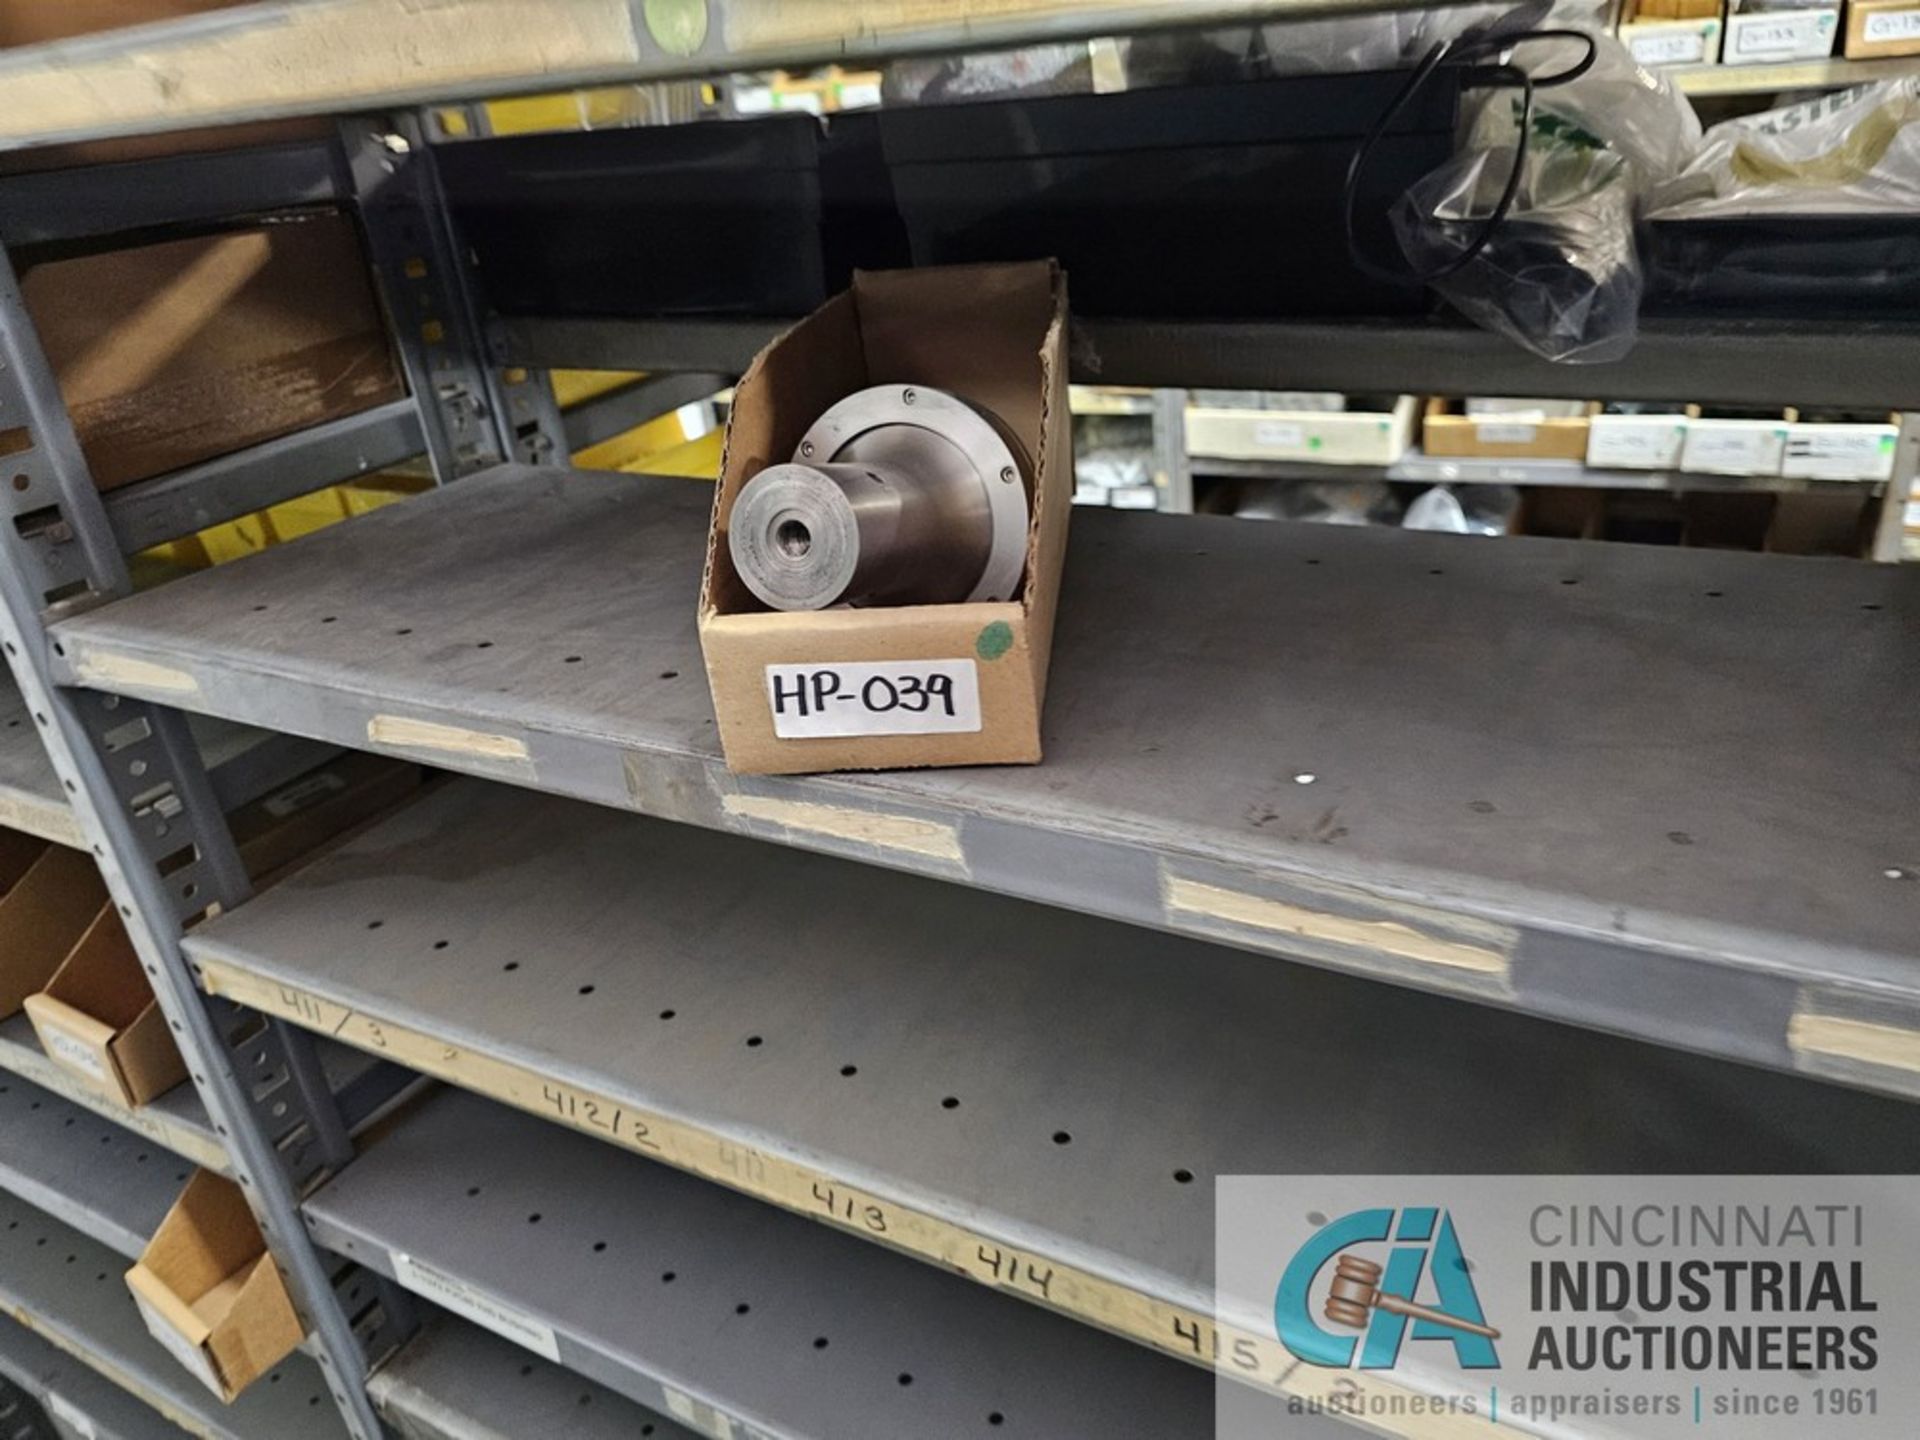 SECTIONS OF SHELVING WITH PARTS CONSISTING OF; BRACKETS, SHOULDER SCREWS, SPRINGS, MOTOR CONTROLS - Image 6 of 7